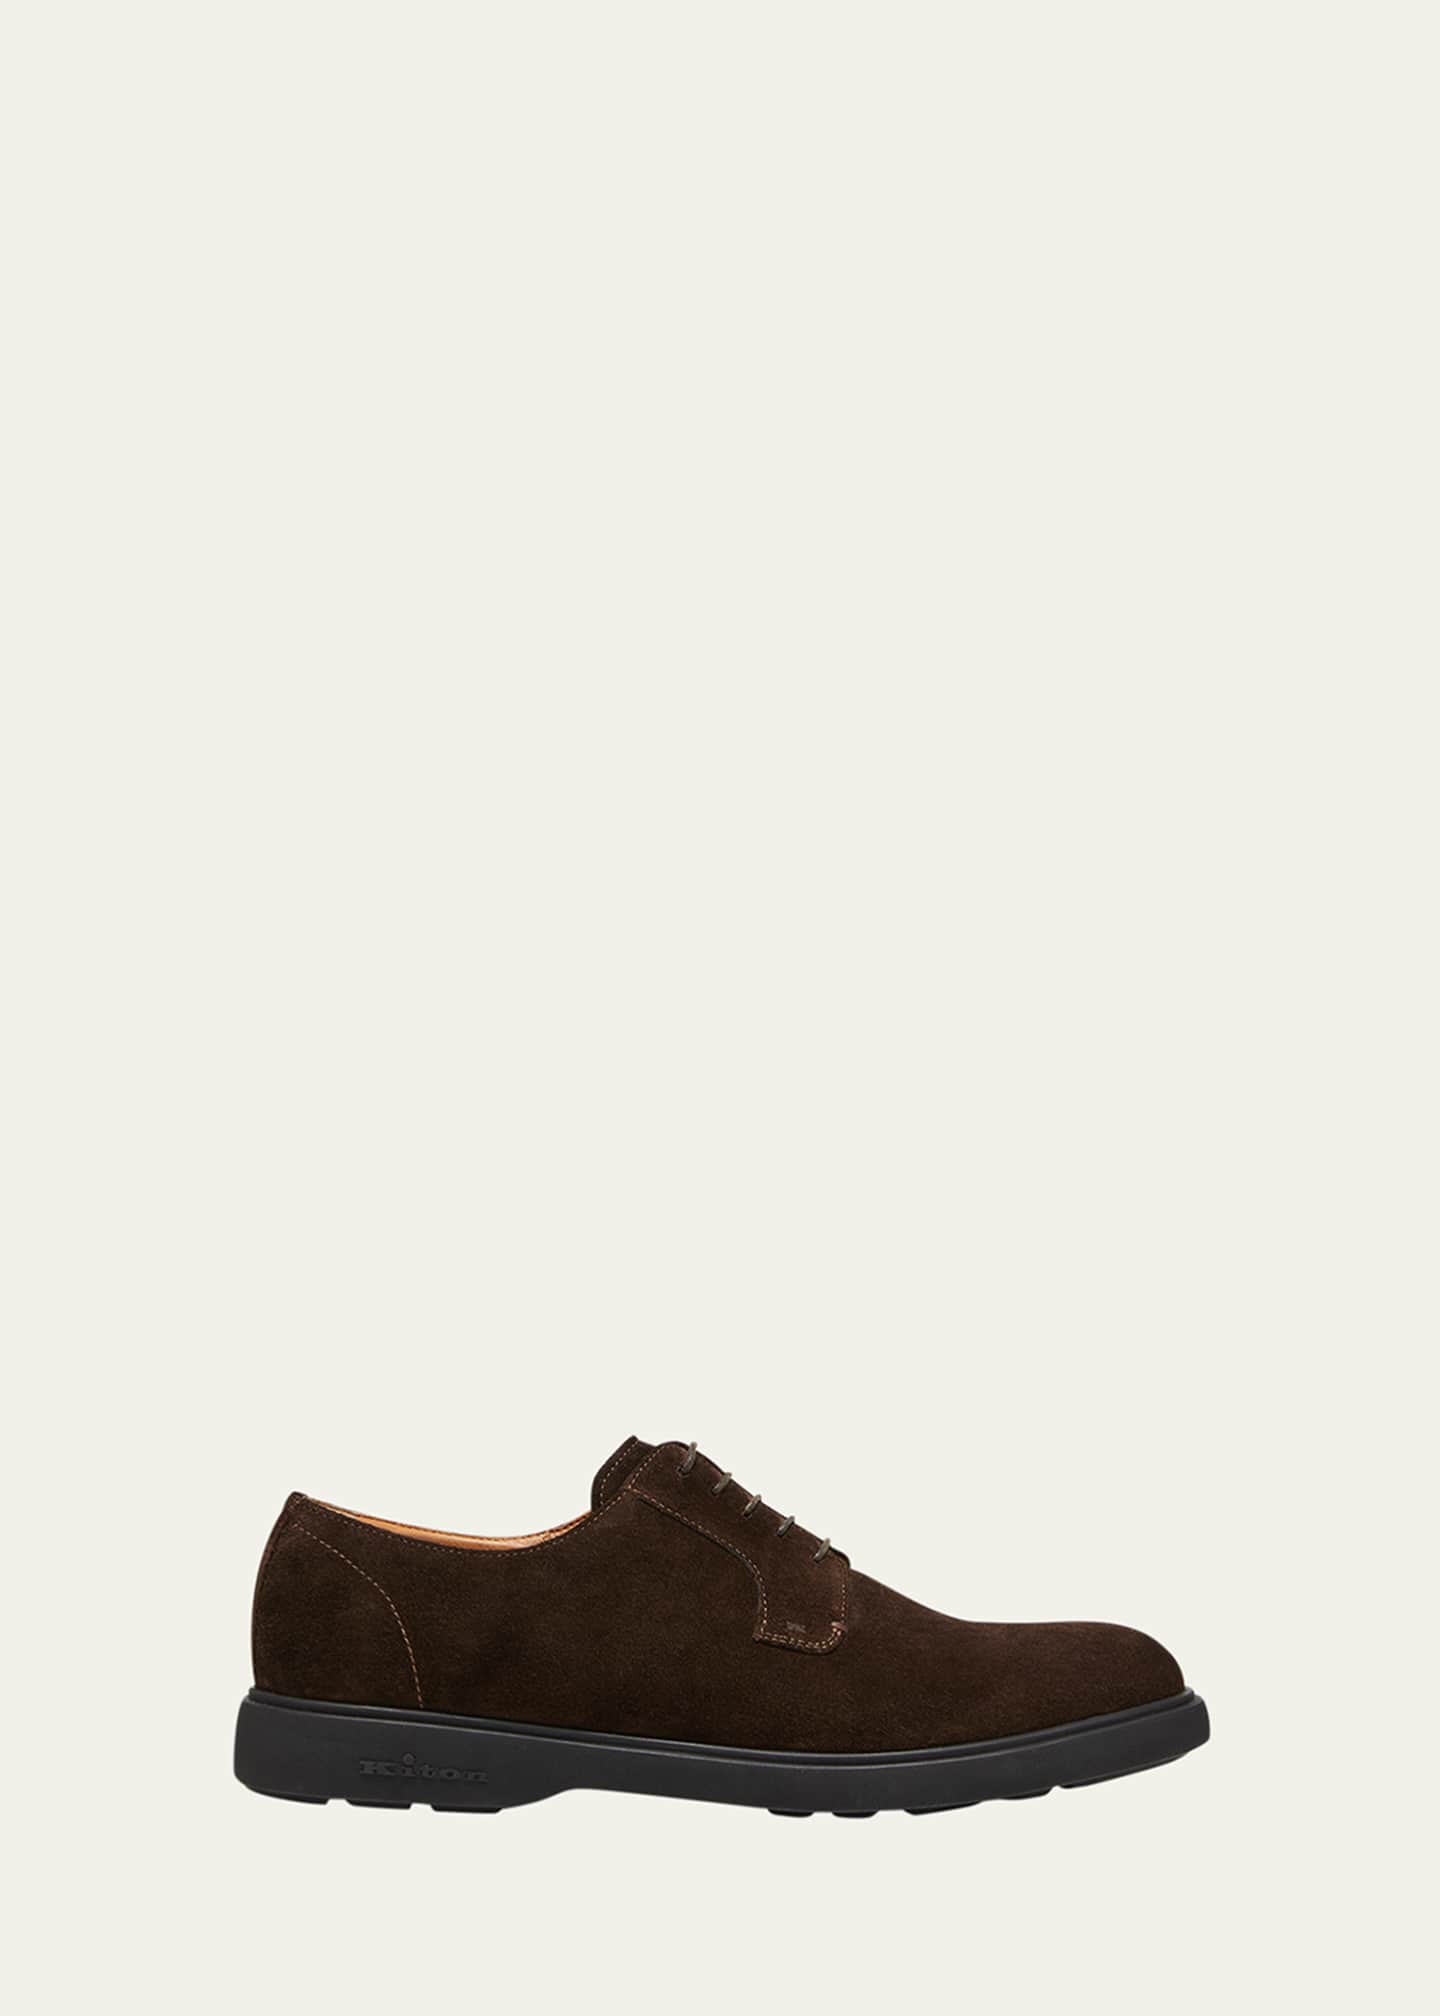 Kiton lace-up suede ankle boots - Brown